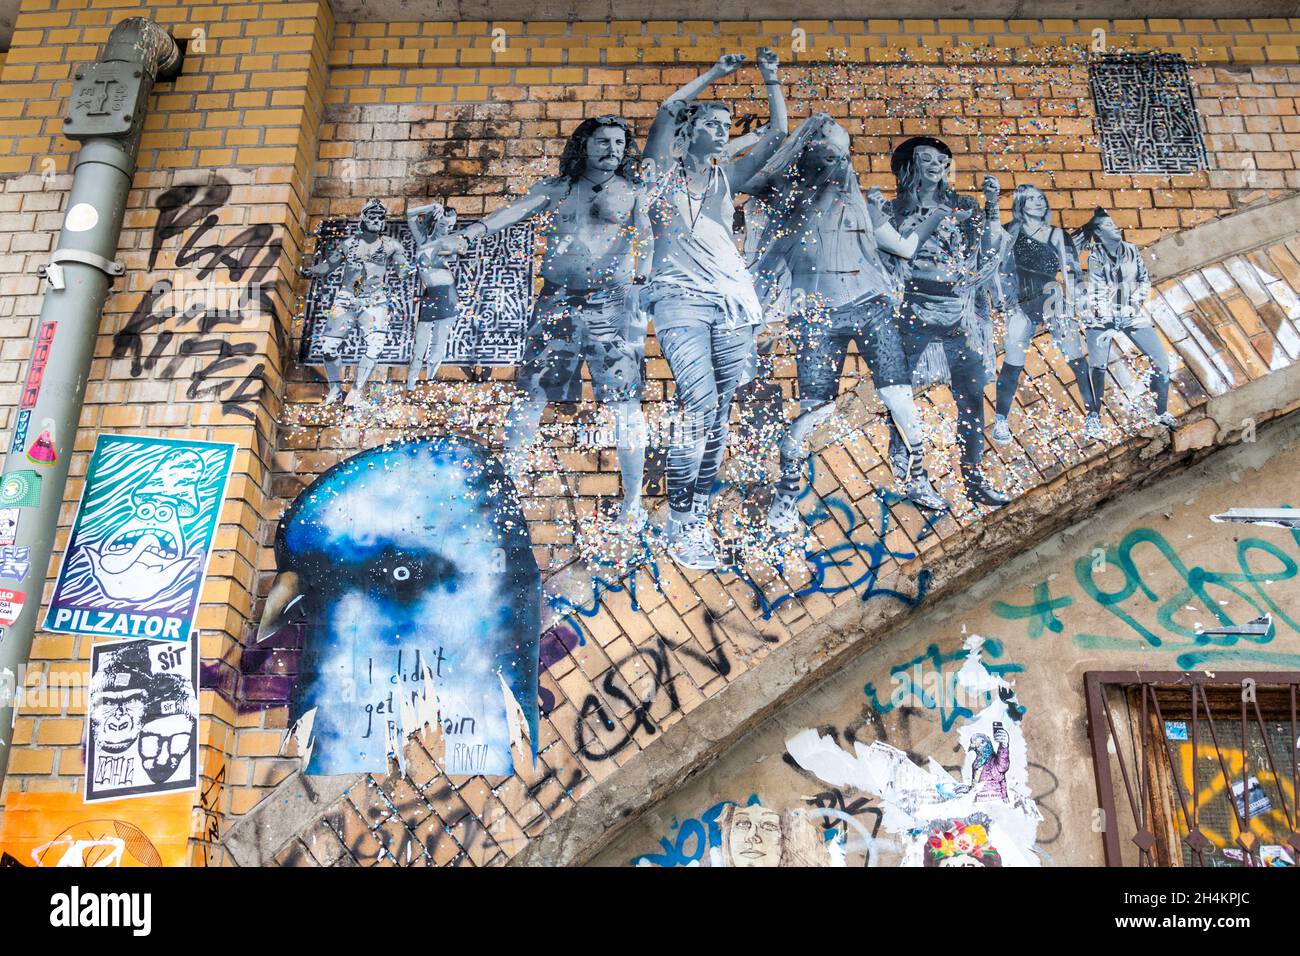 Berlin street photography - on art Alamy building stock hi-res images and